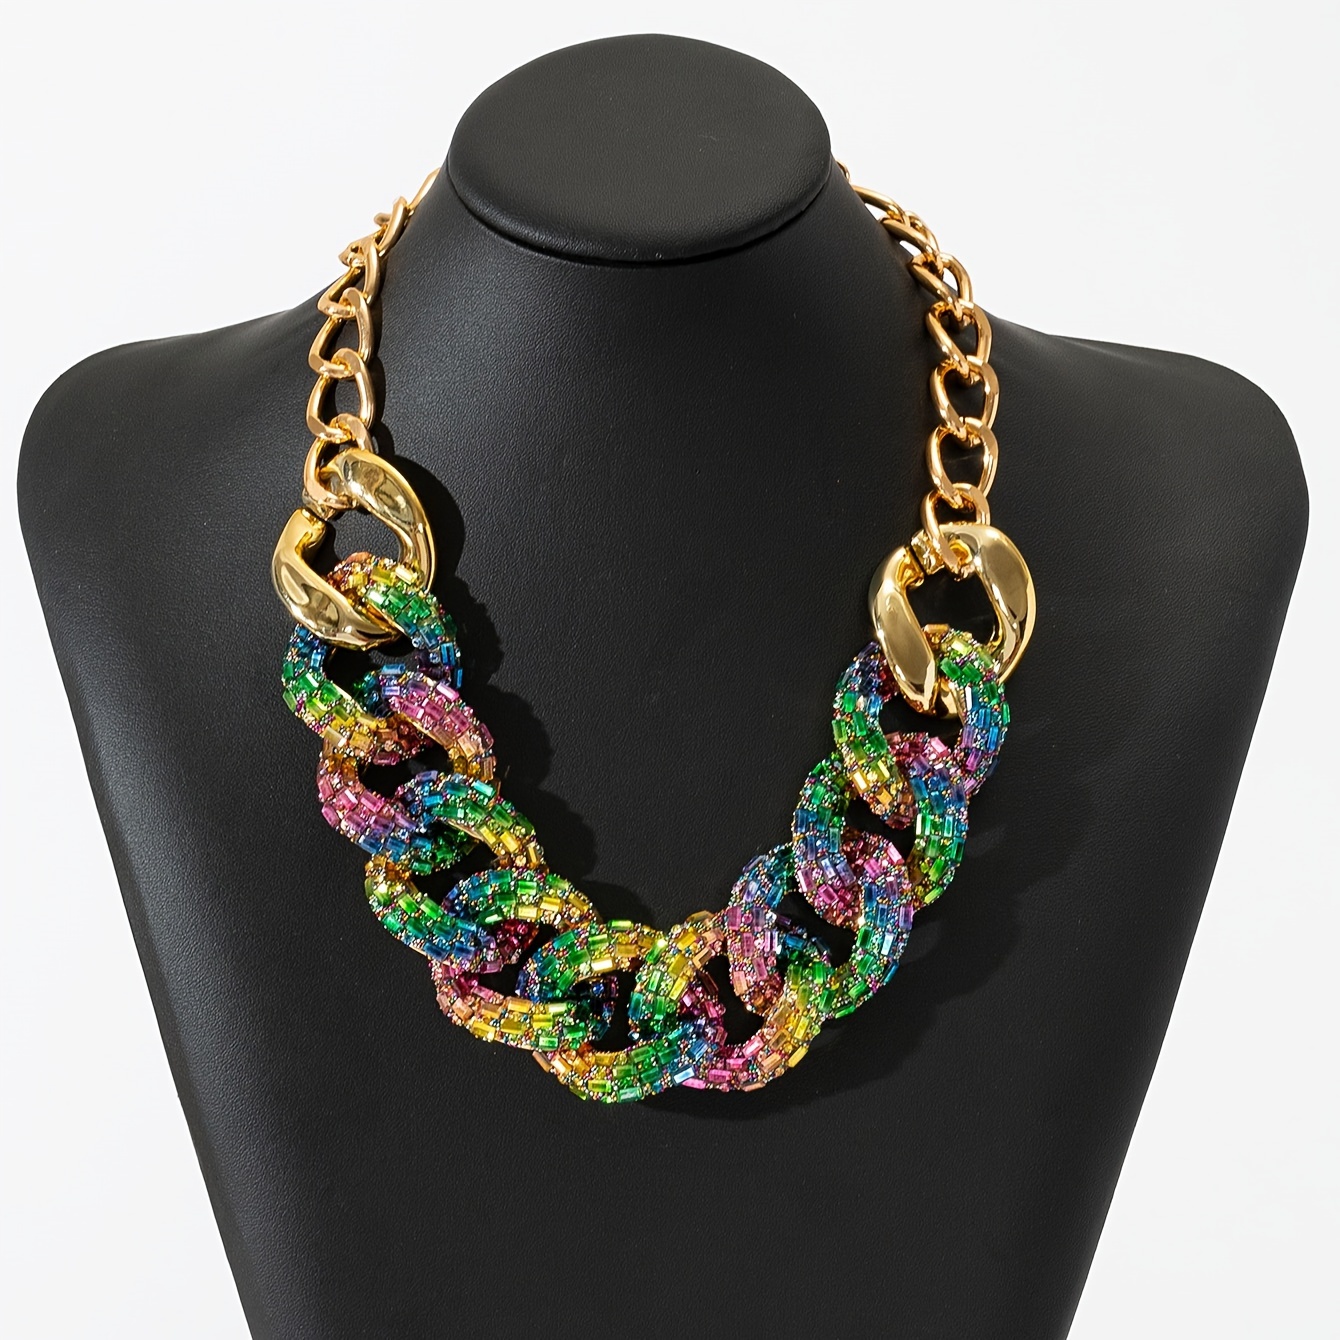 

Bohemian Style Colorful Chunky Hip-hop Punk Rhinestone Chain Necklace And Earrings Set, Fashion Statement Jewelry For Boho Vacation Look